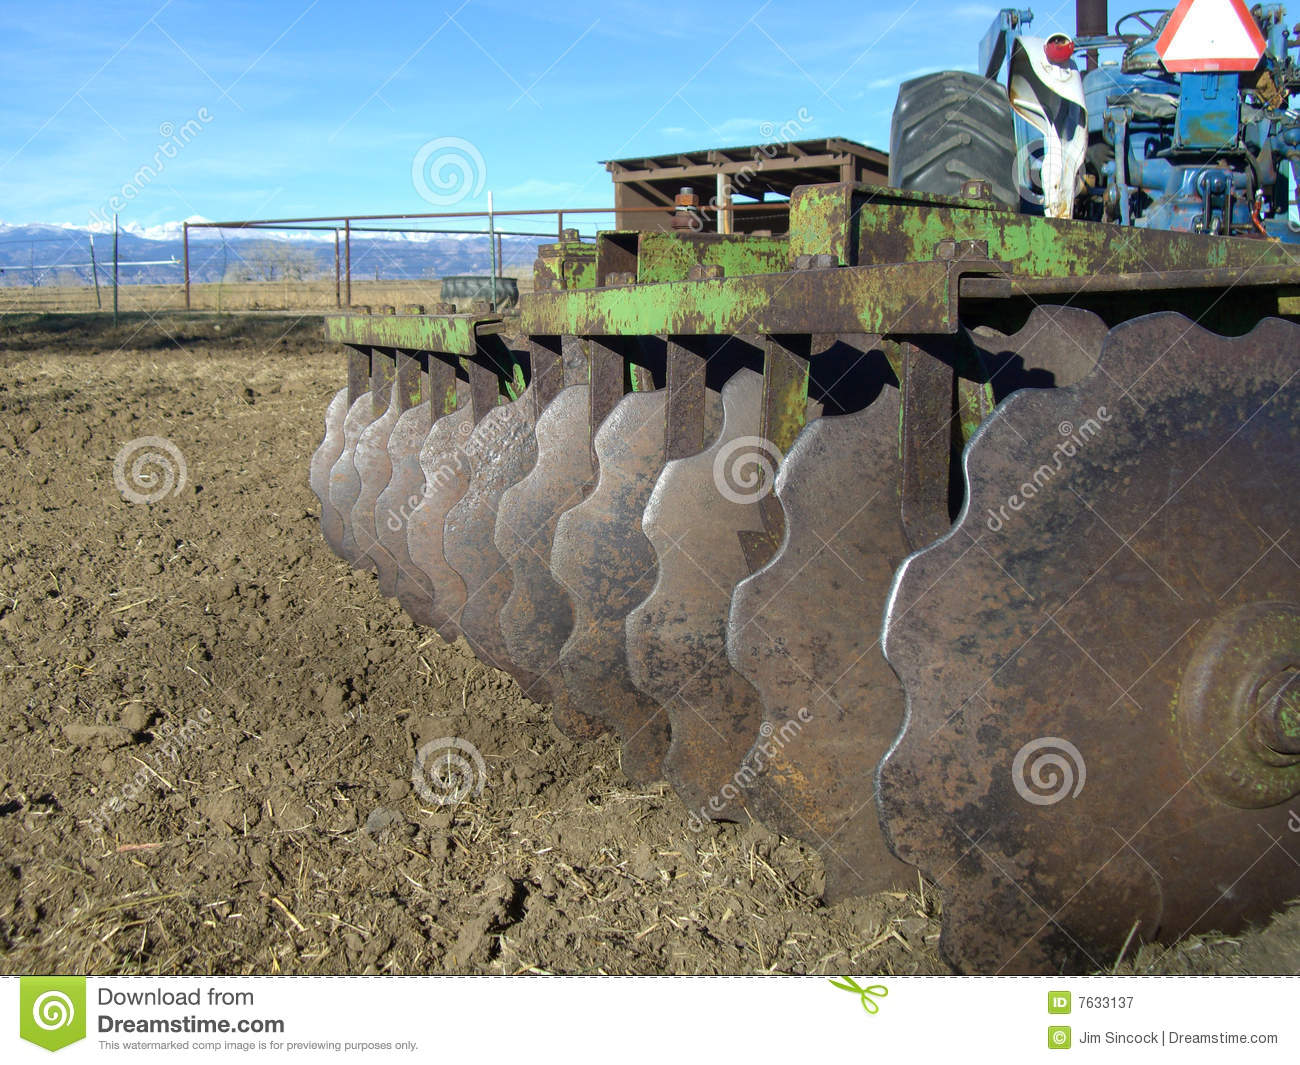 Disk Harrow And Tractor In Farm Field With Mountains In Background